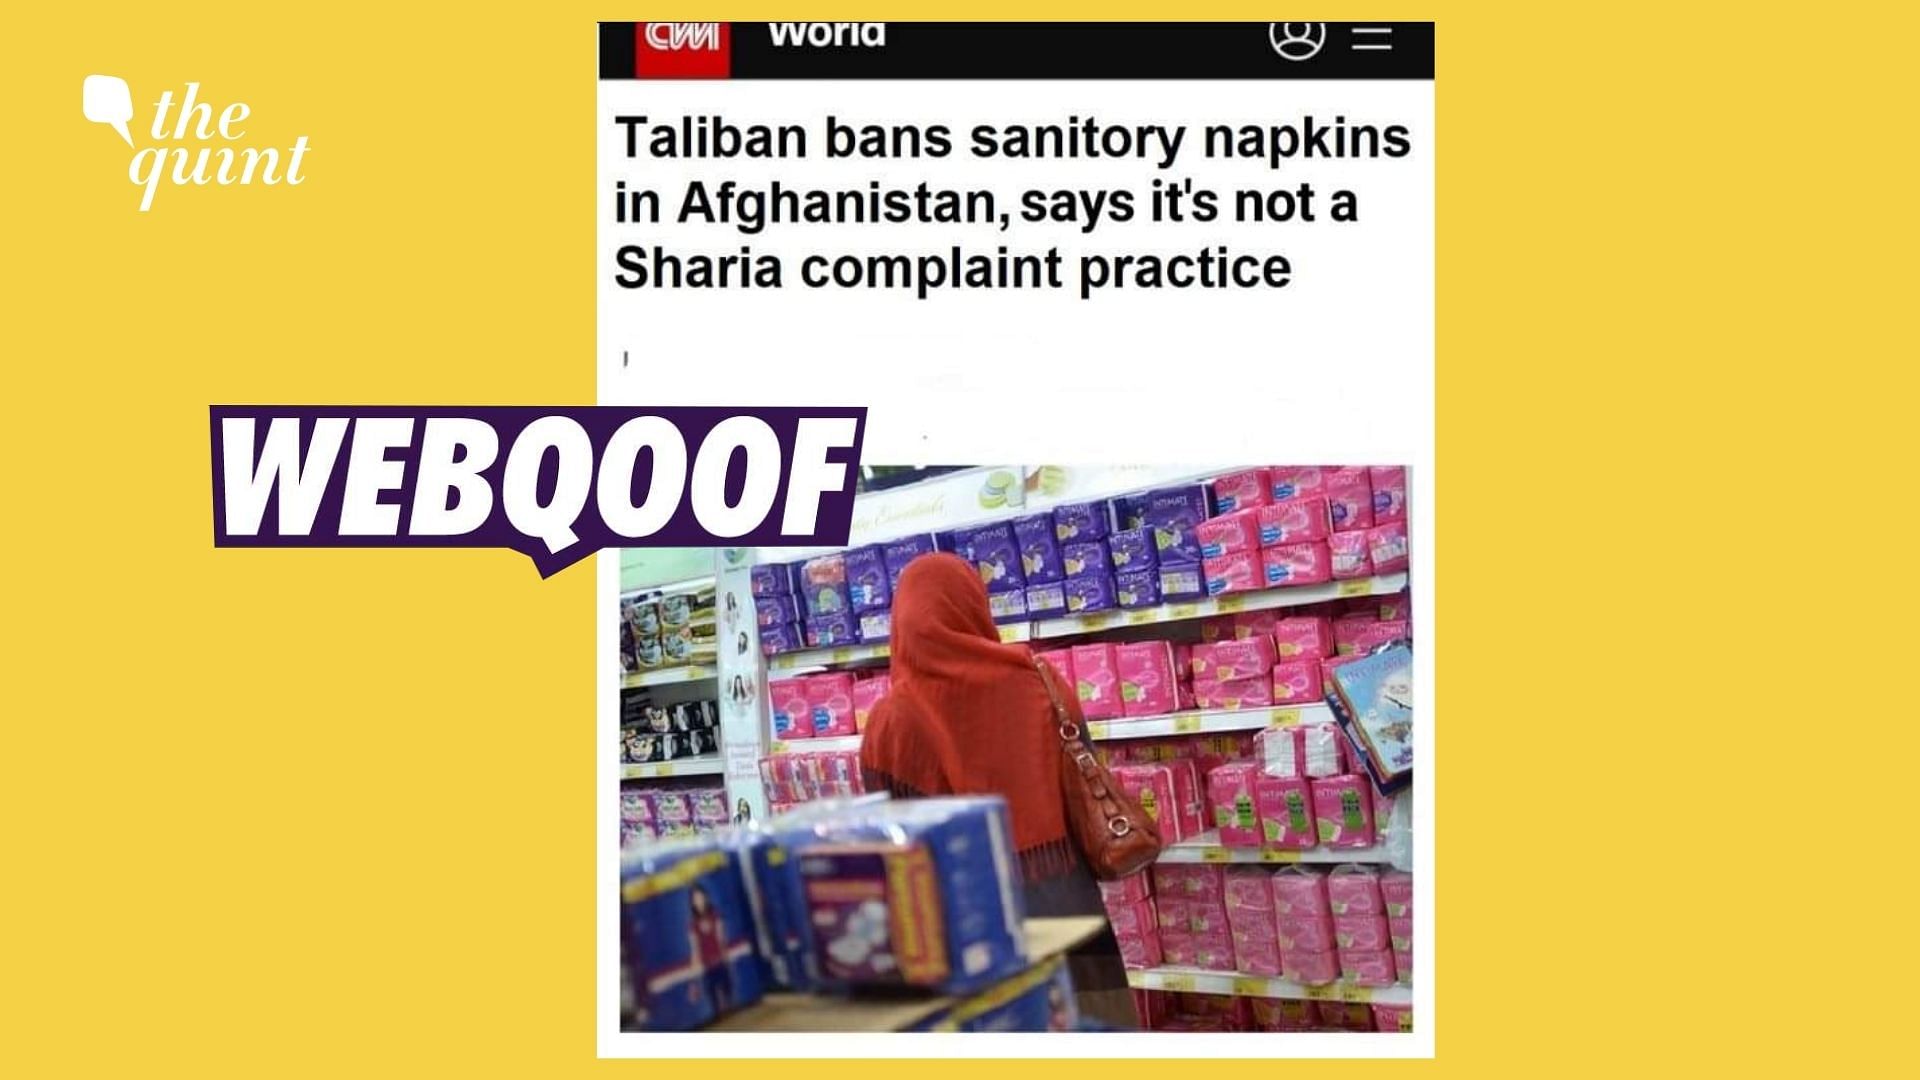 <div class="paragraphs"><p>A morphed screenshot was shared by social media users falsely claiming to show that  CNN published an article on the Taliban banning sanitary napkins in Afghanistan.</p></div>